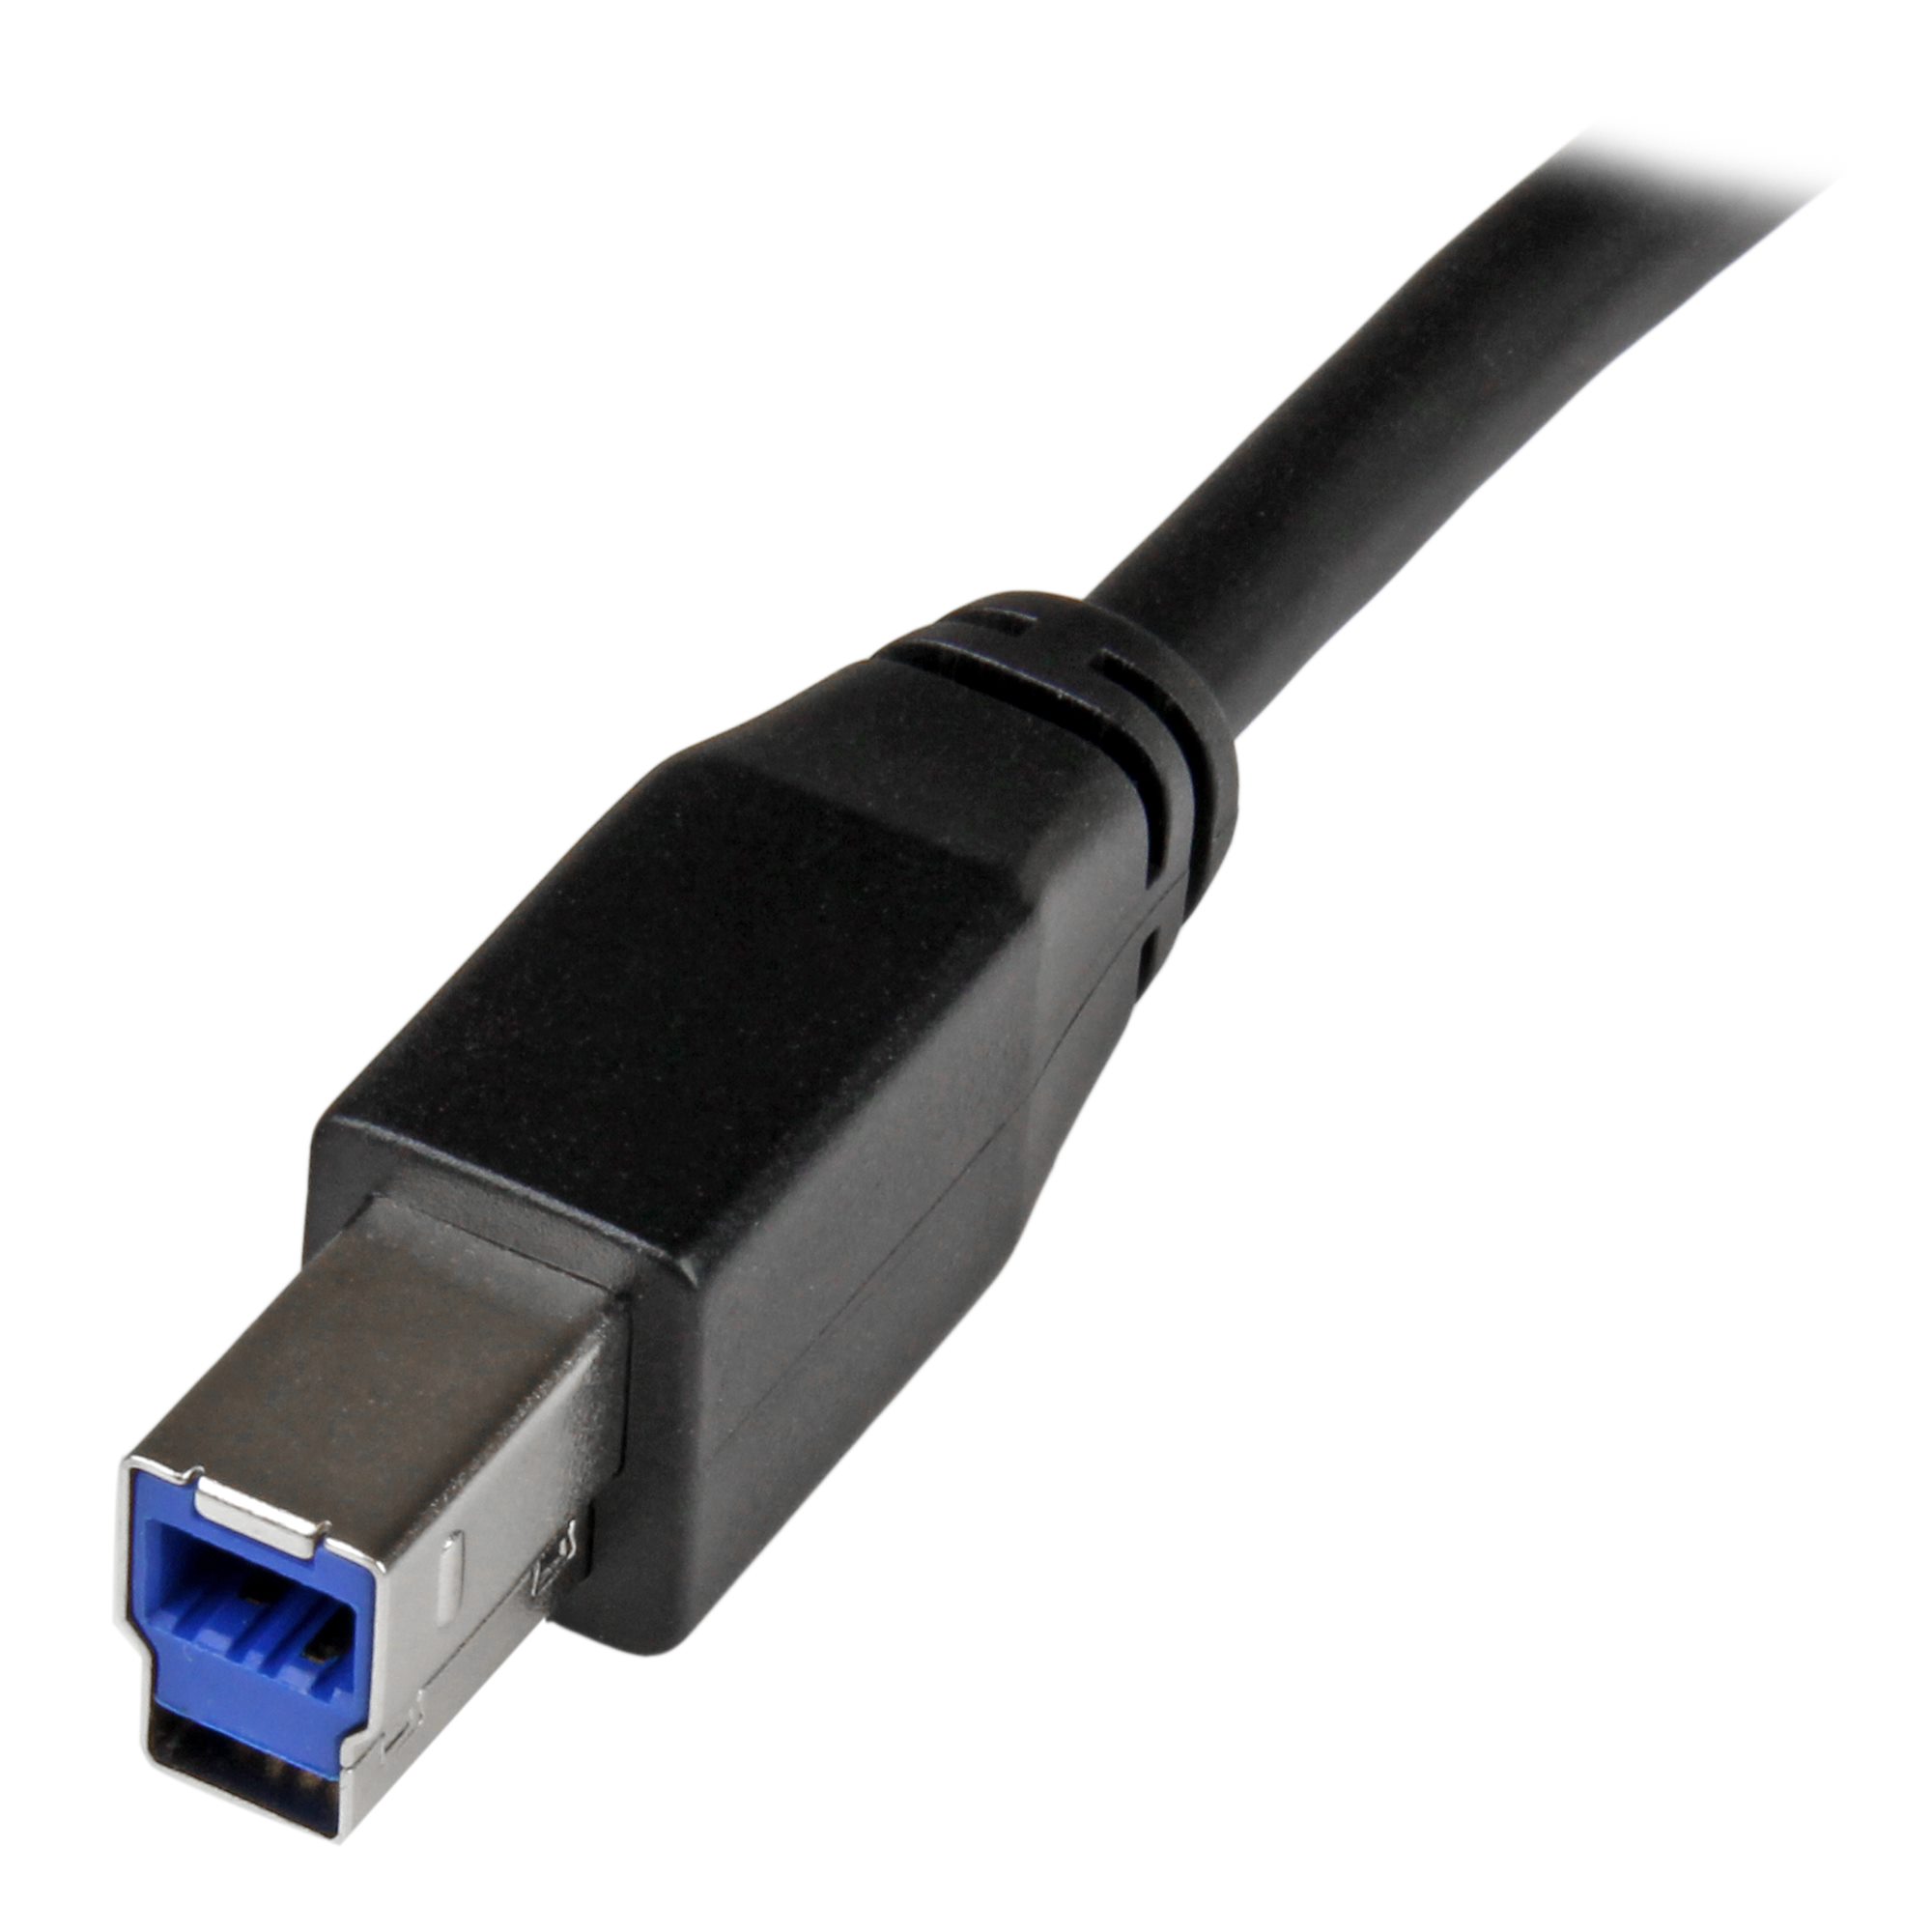 30ft Active USB 3.0 USB-A to USB-B Cable - USB 3.0 Cables